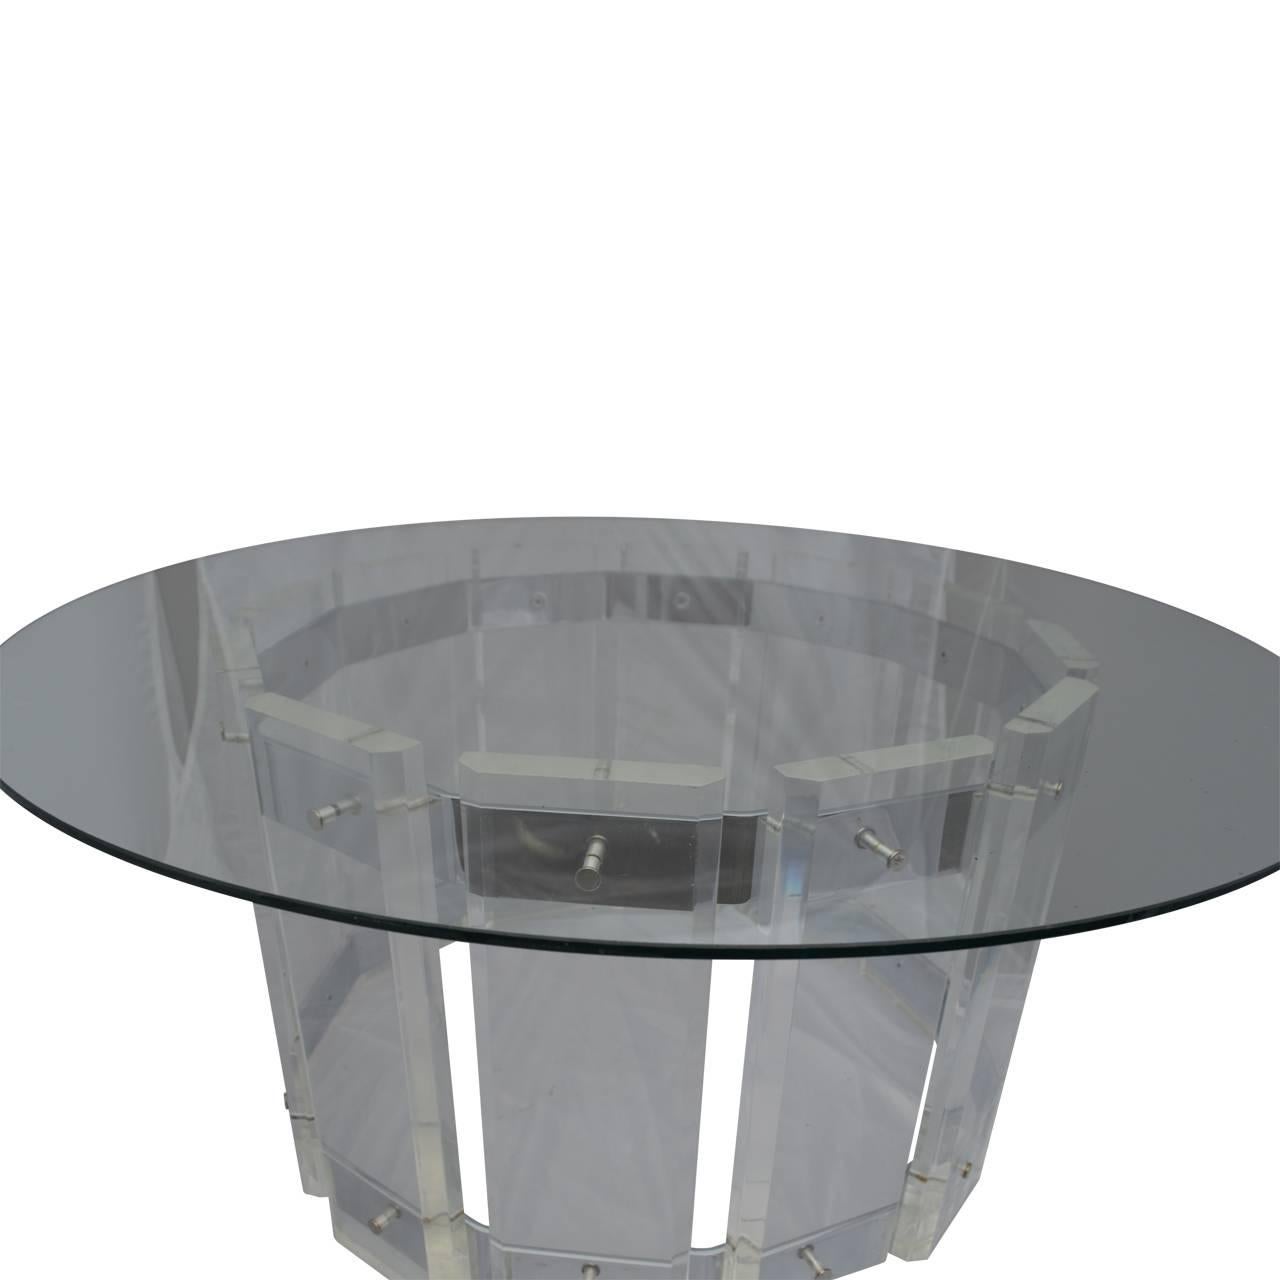 20th Century American Mid-Century Modern Round Lucite Glass Top Table For Sale